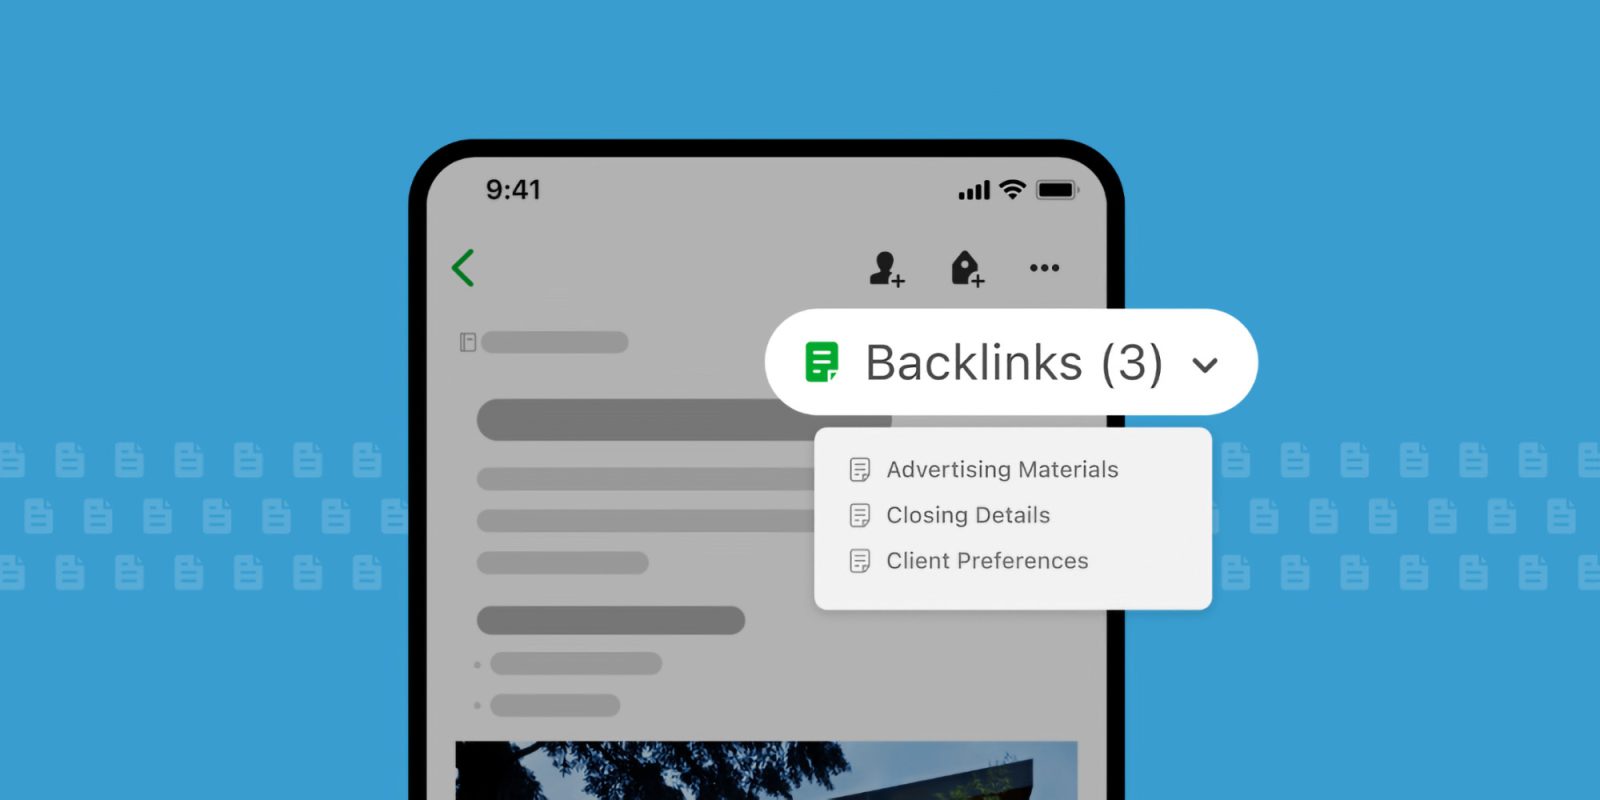 Evernote rolling out Backlinks to let users easily return to previous notes